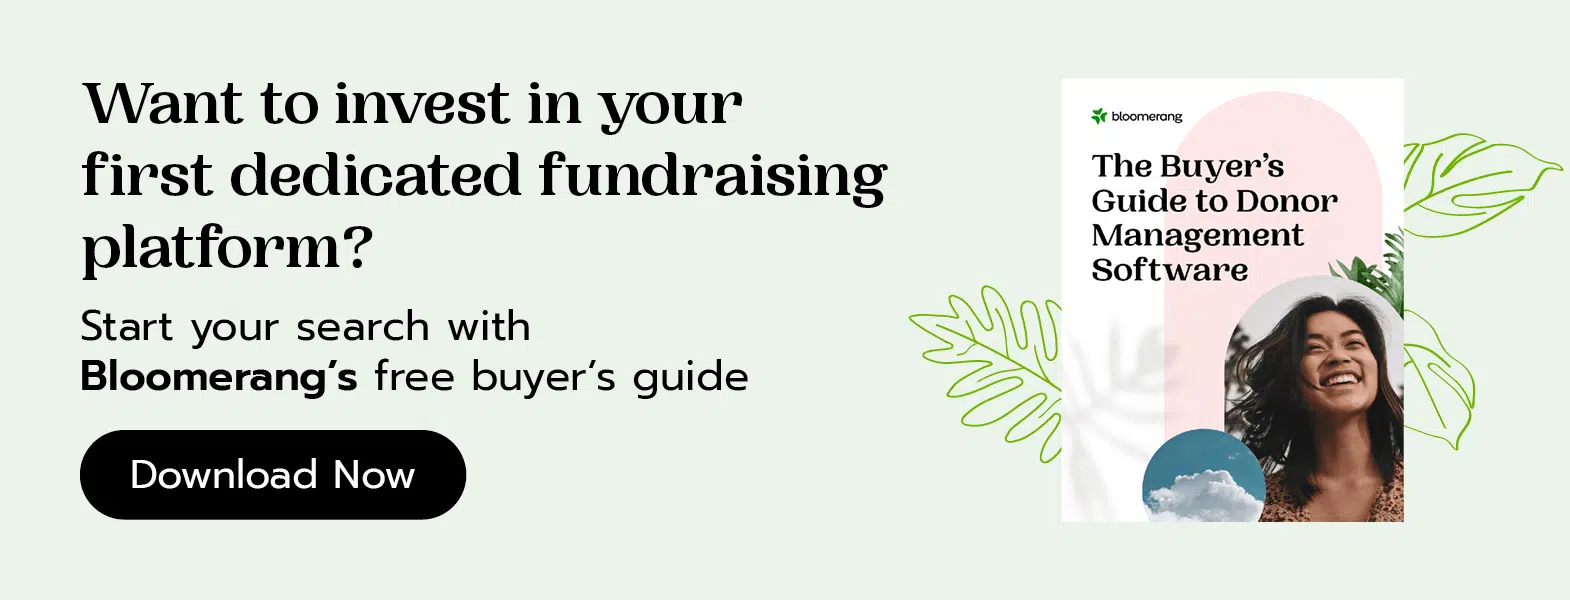 Ready to invest in your first dedicated fundraising platform? Start your search with Bloomerang’s free buyer’s guide. Download the guide here.